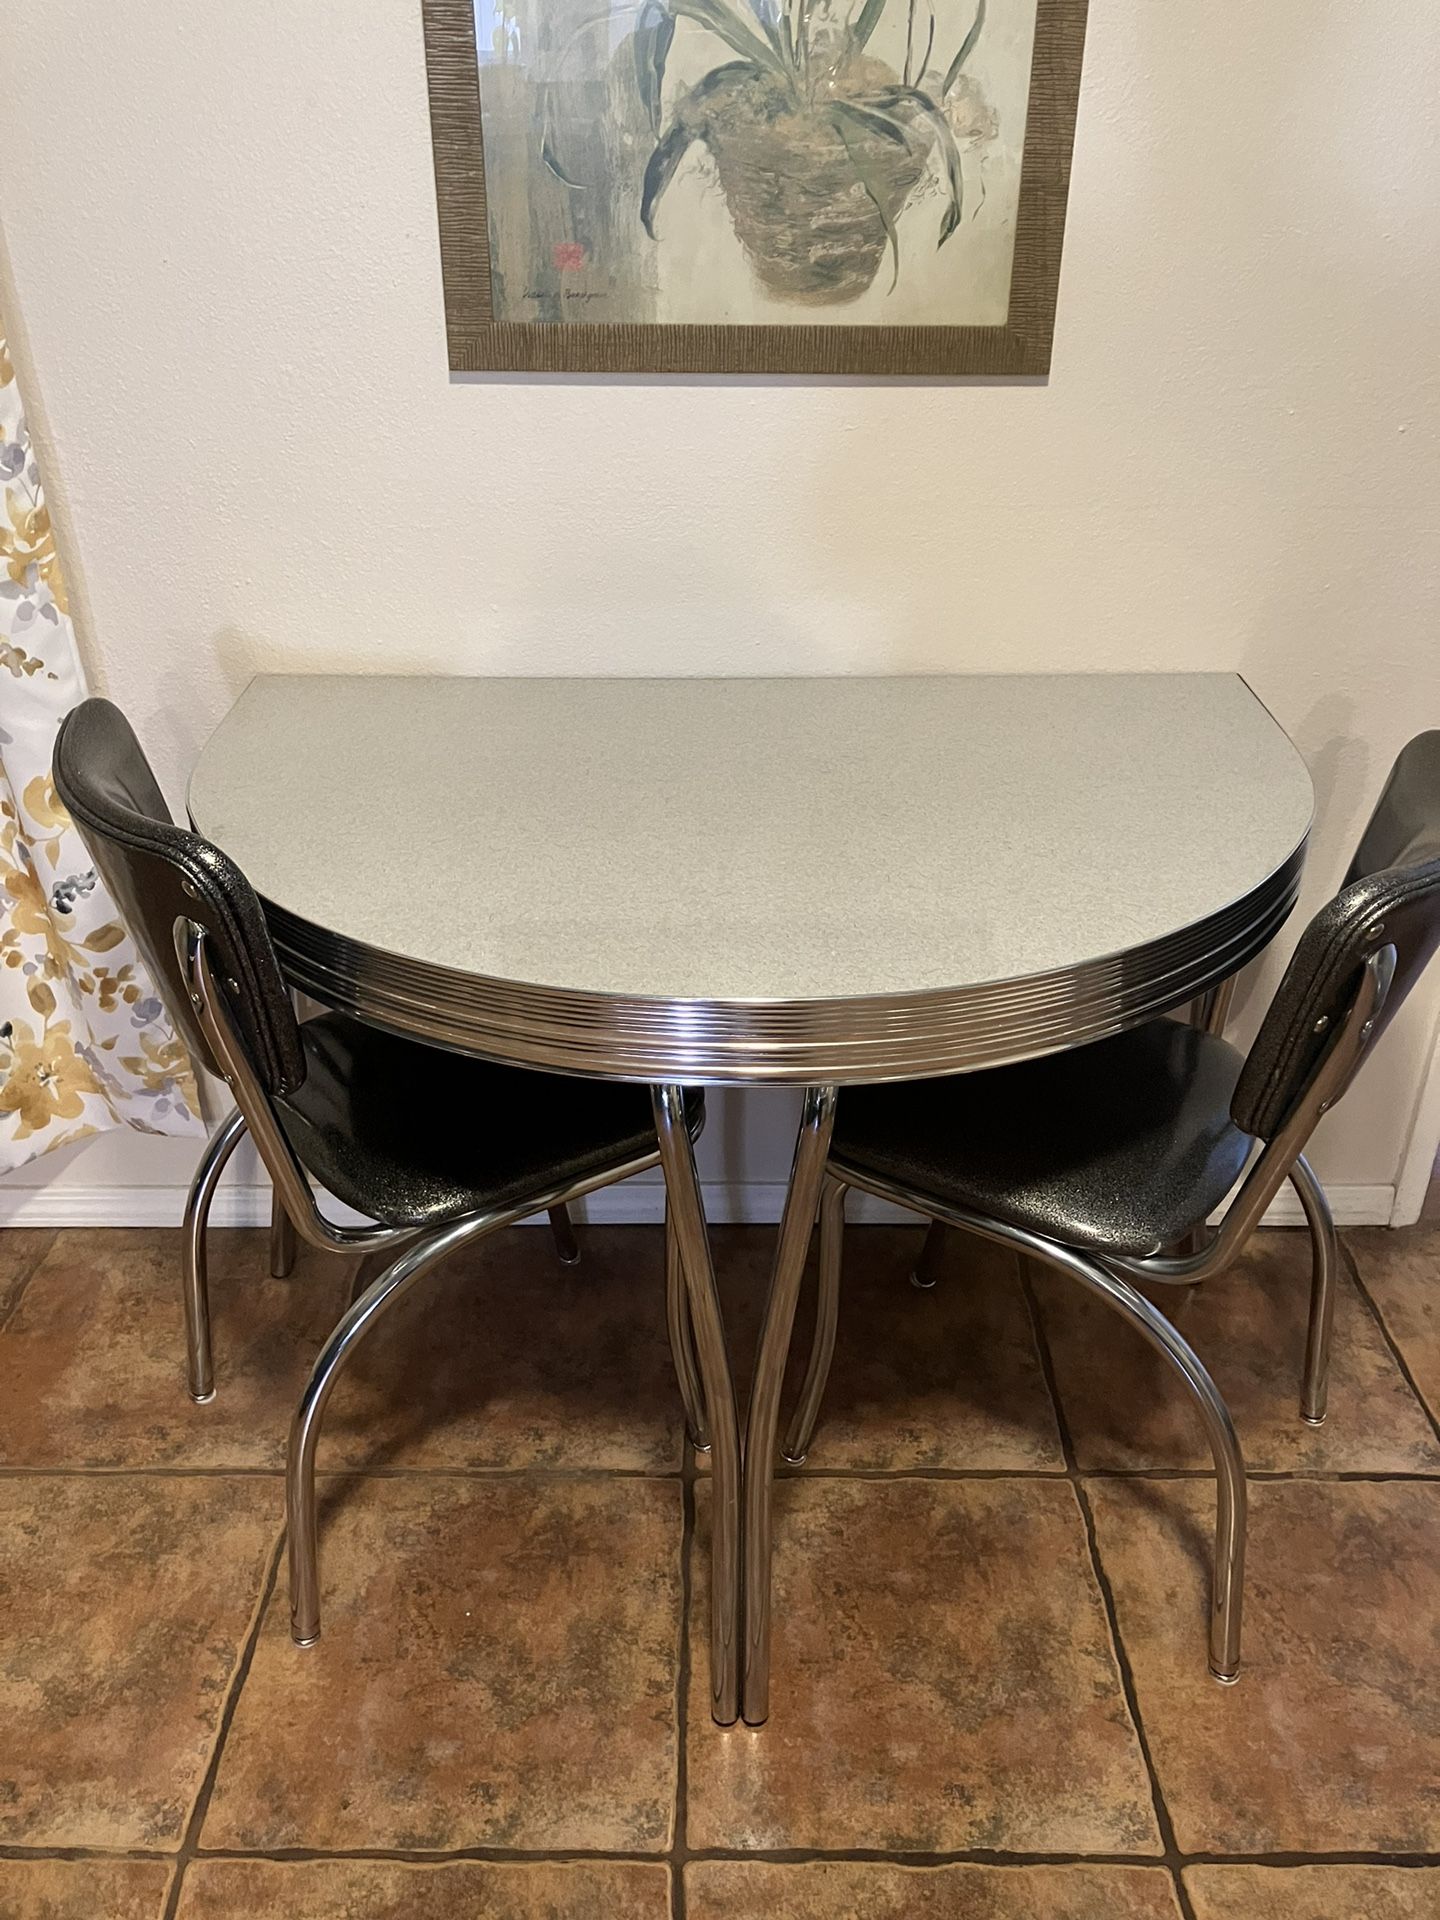 Diner style  1/2 Table + 2 Chairs =$175